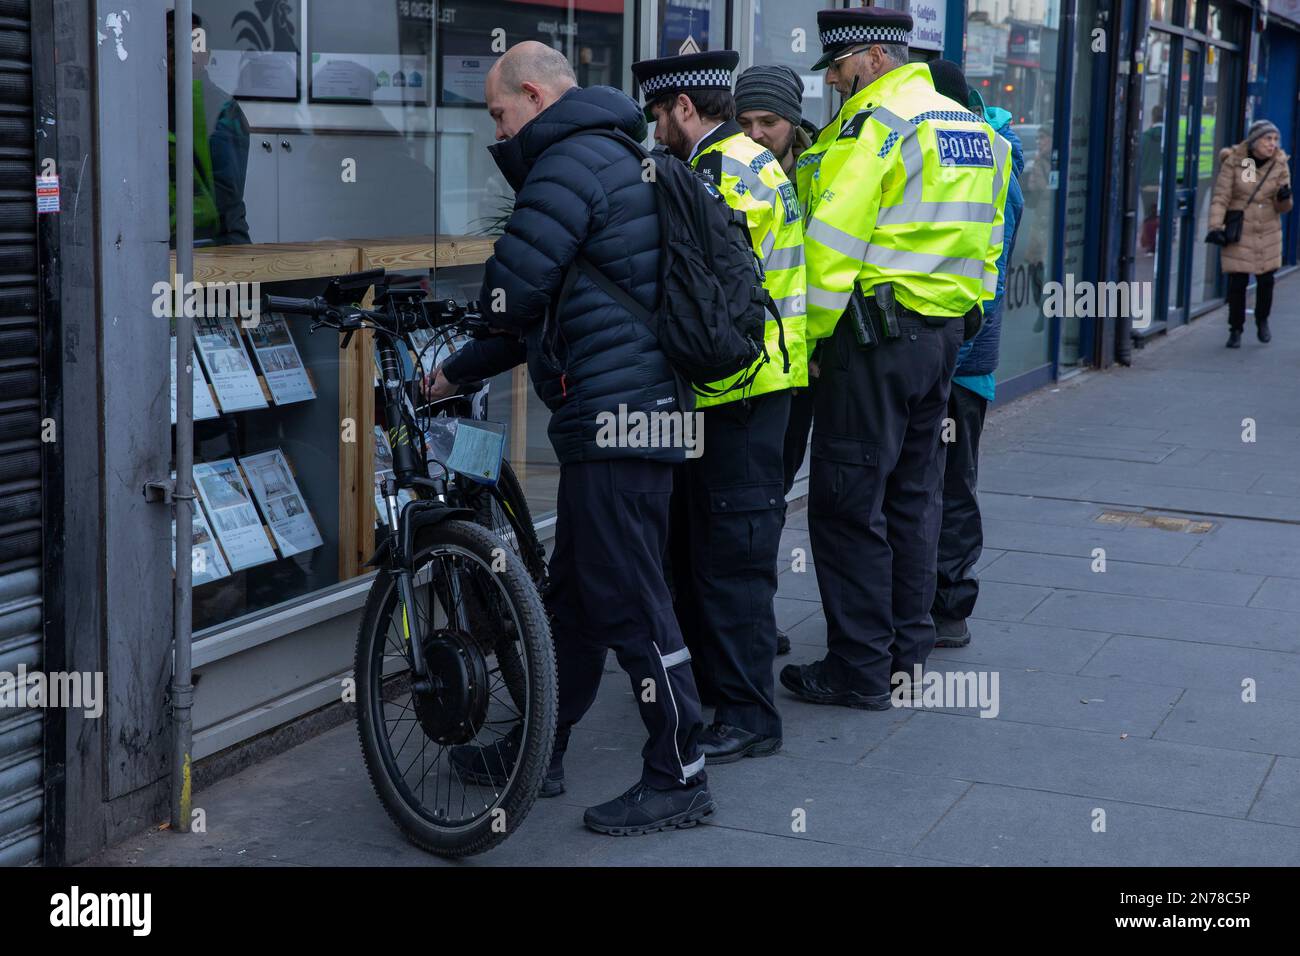 London, UK. 10th February, 2023. Metropolitan Police officers impound a bicycle during a pre-planned operation in Walthamstow to seize bicycles illegally modified to become mechanically propelled vehicles, mechanically propelled vehicles ridden without a licence or insurance and e-scooters. The Metropolitan Police officer in charge of the operation advised that complaints had been received of bicycles being ridden at high speeds in the local area. Credit: Mark Kerrison/Alamy Live News Stock Photo